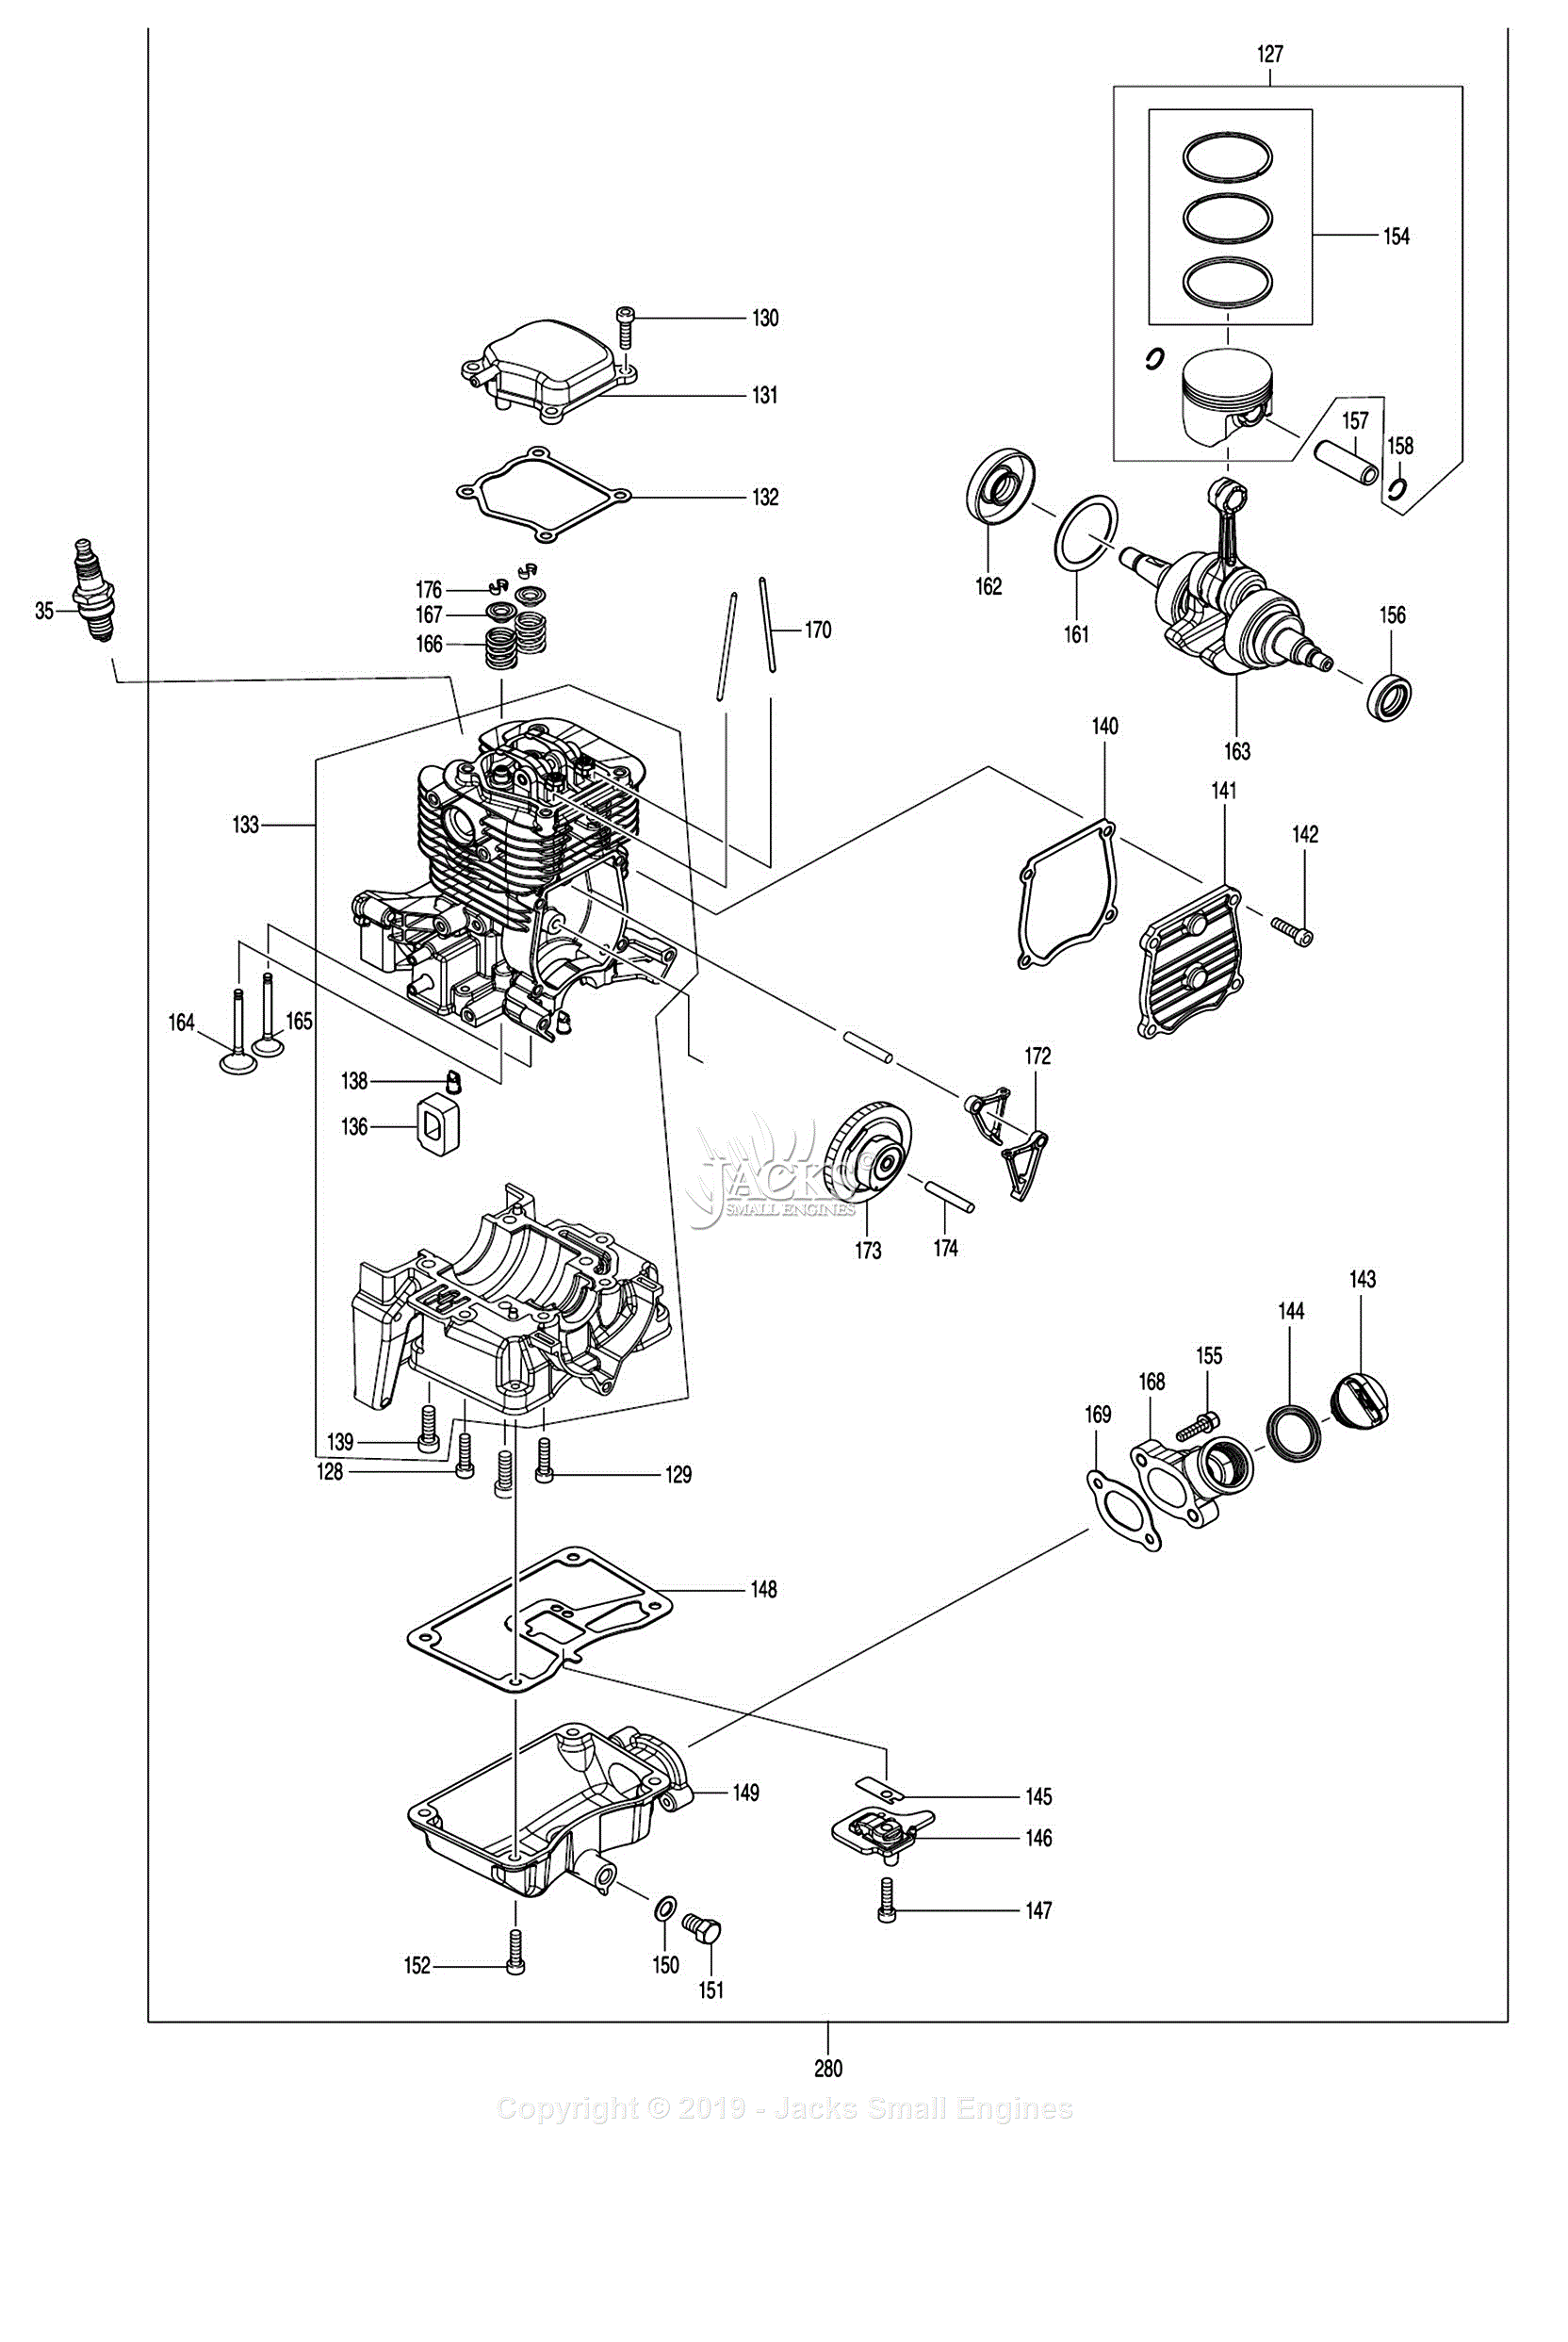 Assortiment Uitdaging Oh jee Makita EB5300TH Parts Diagram for 6 - Cylinder Block Assembly, Crank